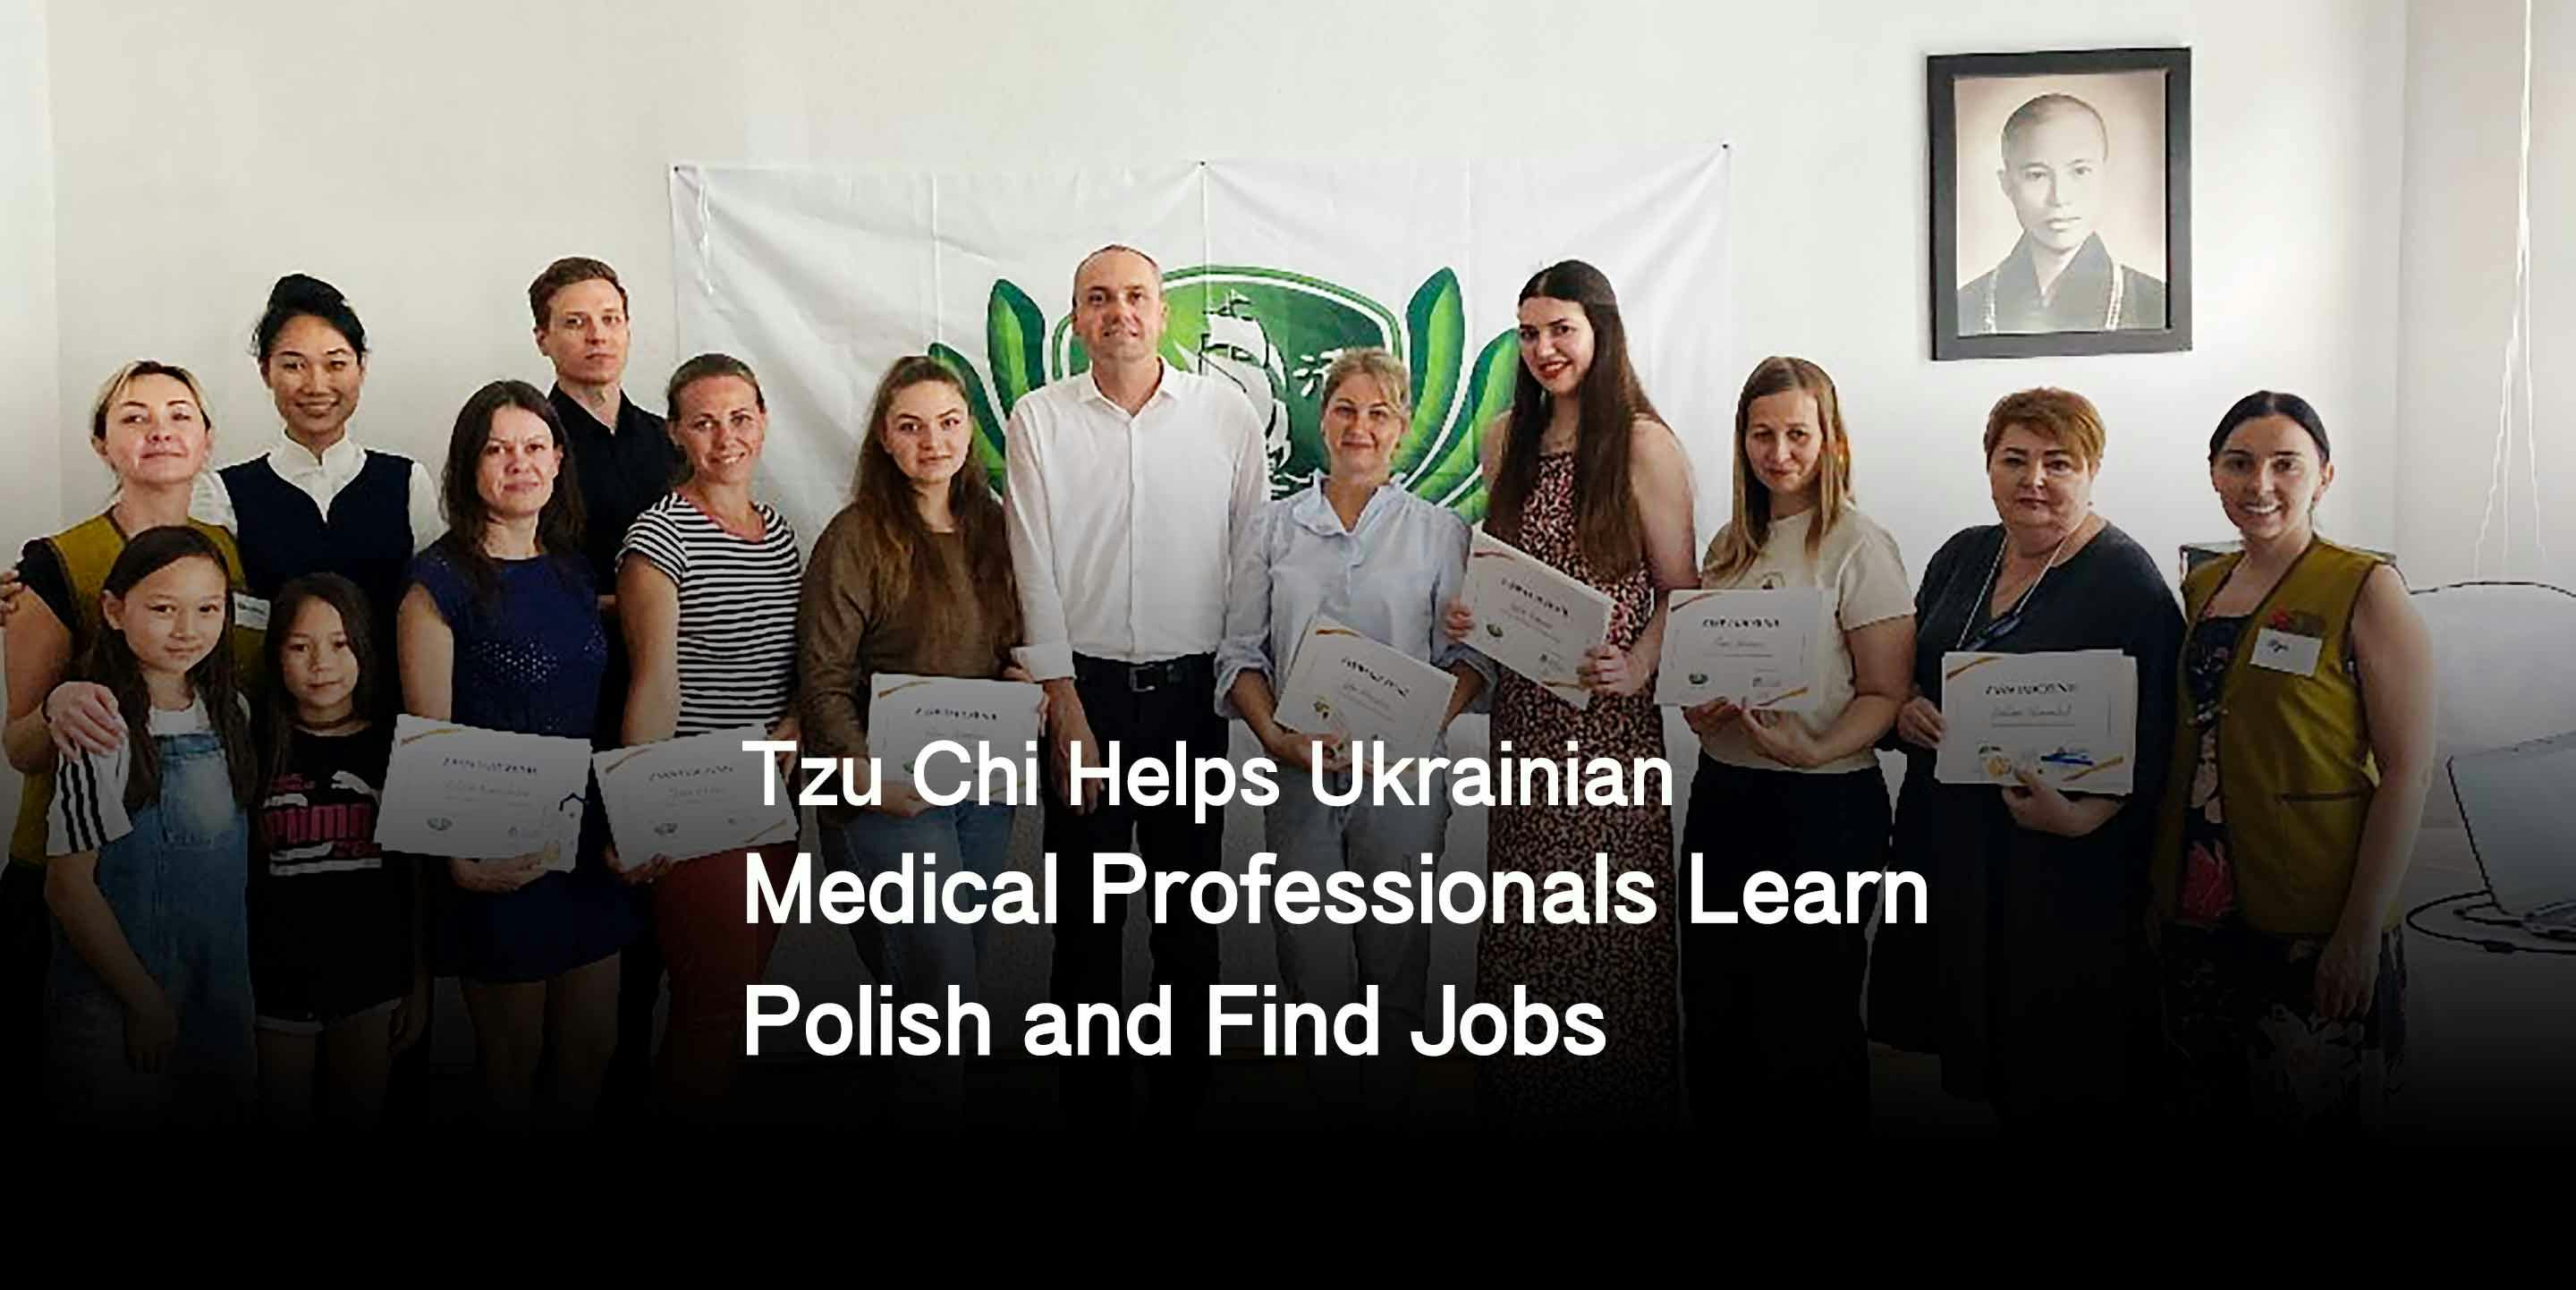 Tzu Chi Helps Ukrainian Medical Professionals Learn Polish and Find Jobs